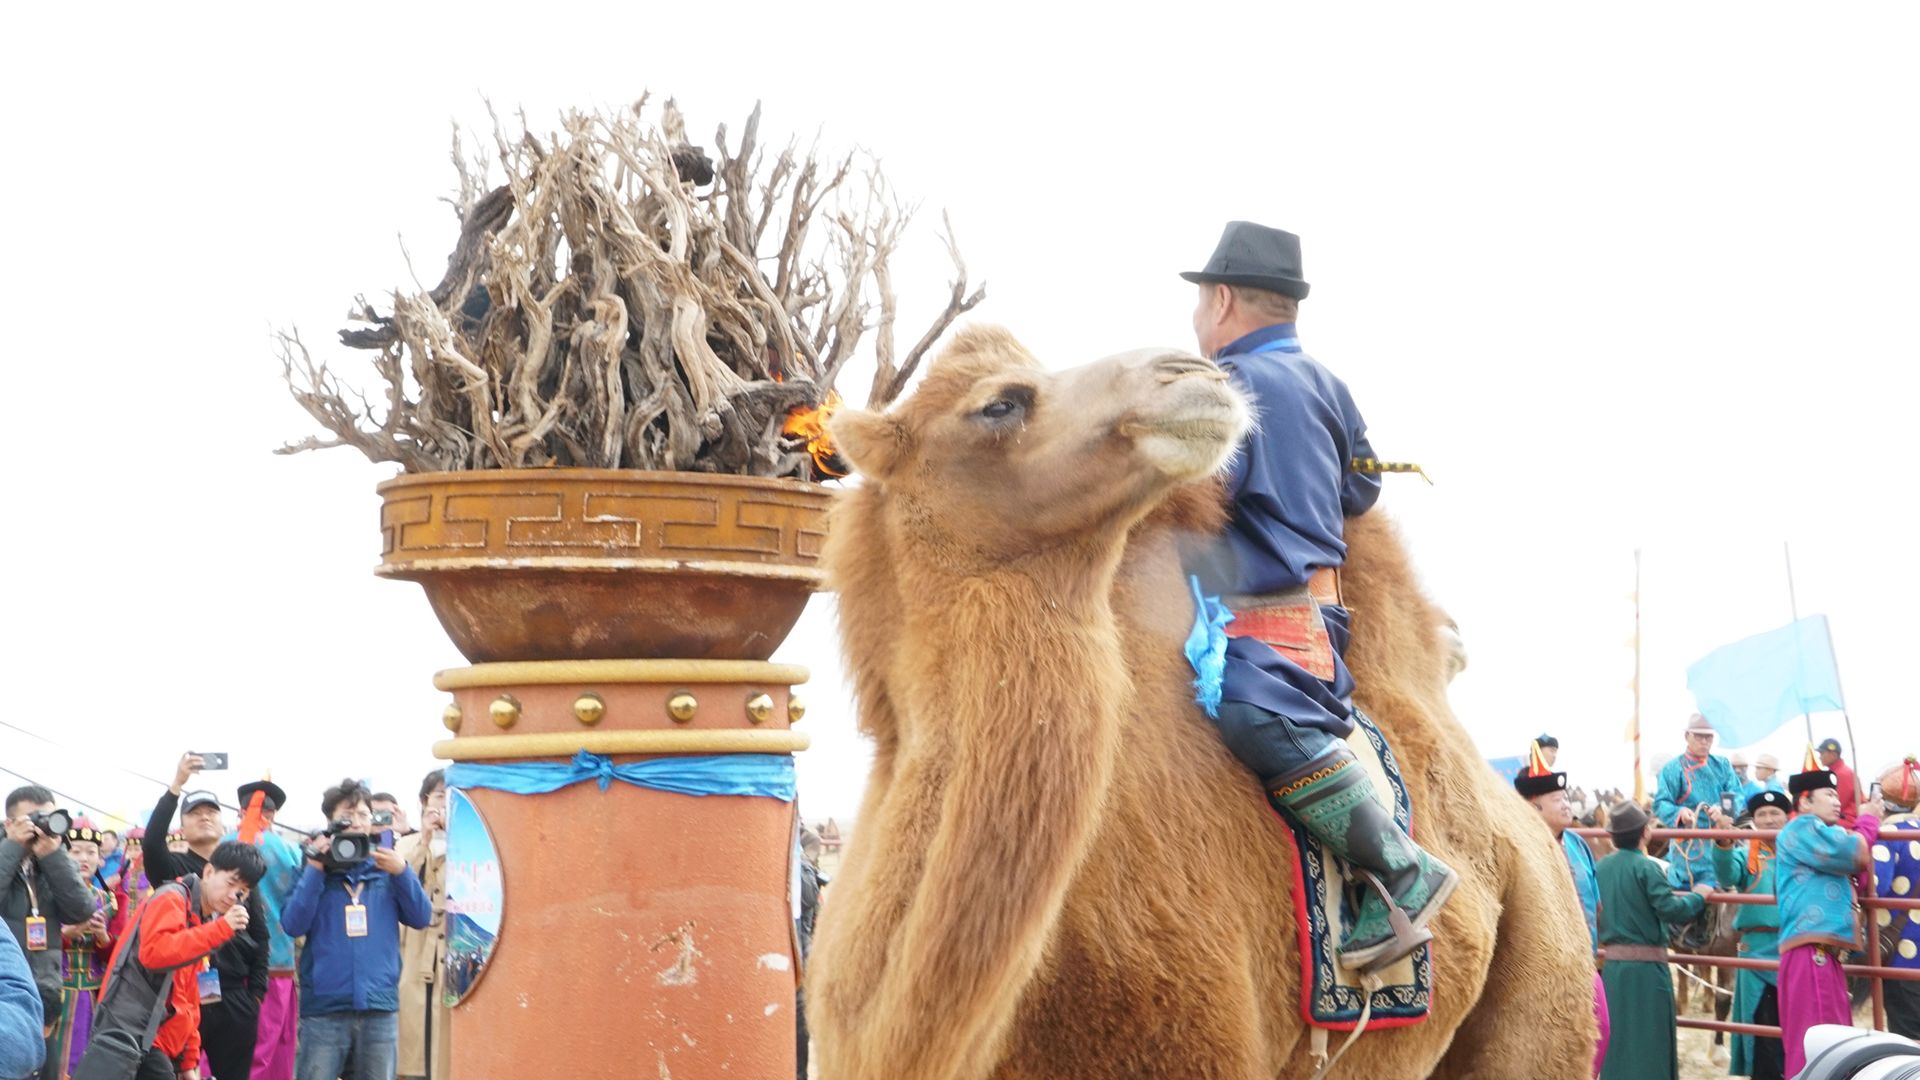 Firing ceremony at Camels' Festival's opening. [Photo of the day - October 2021]